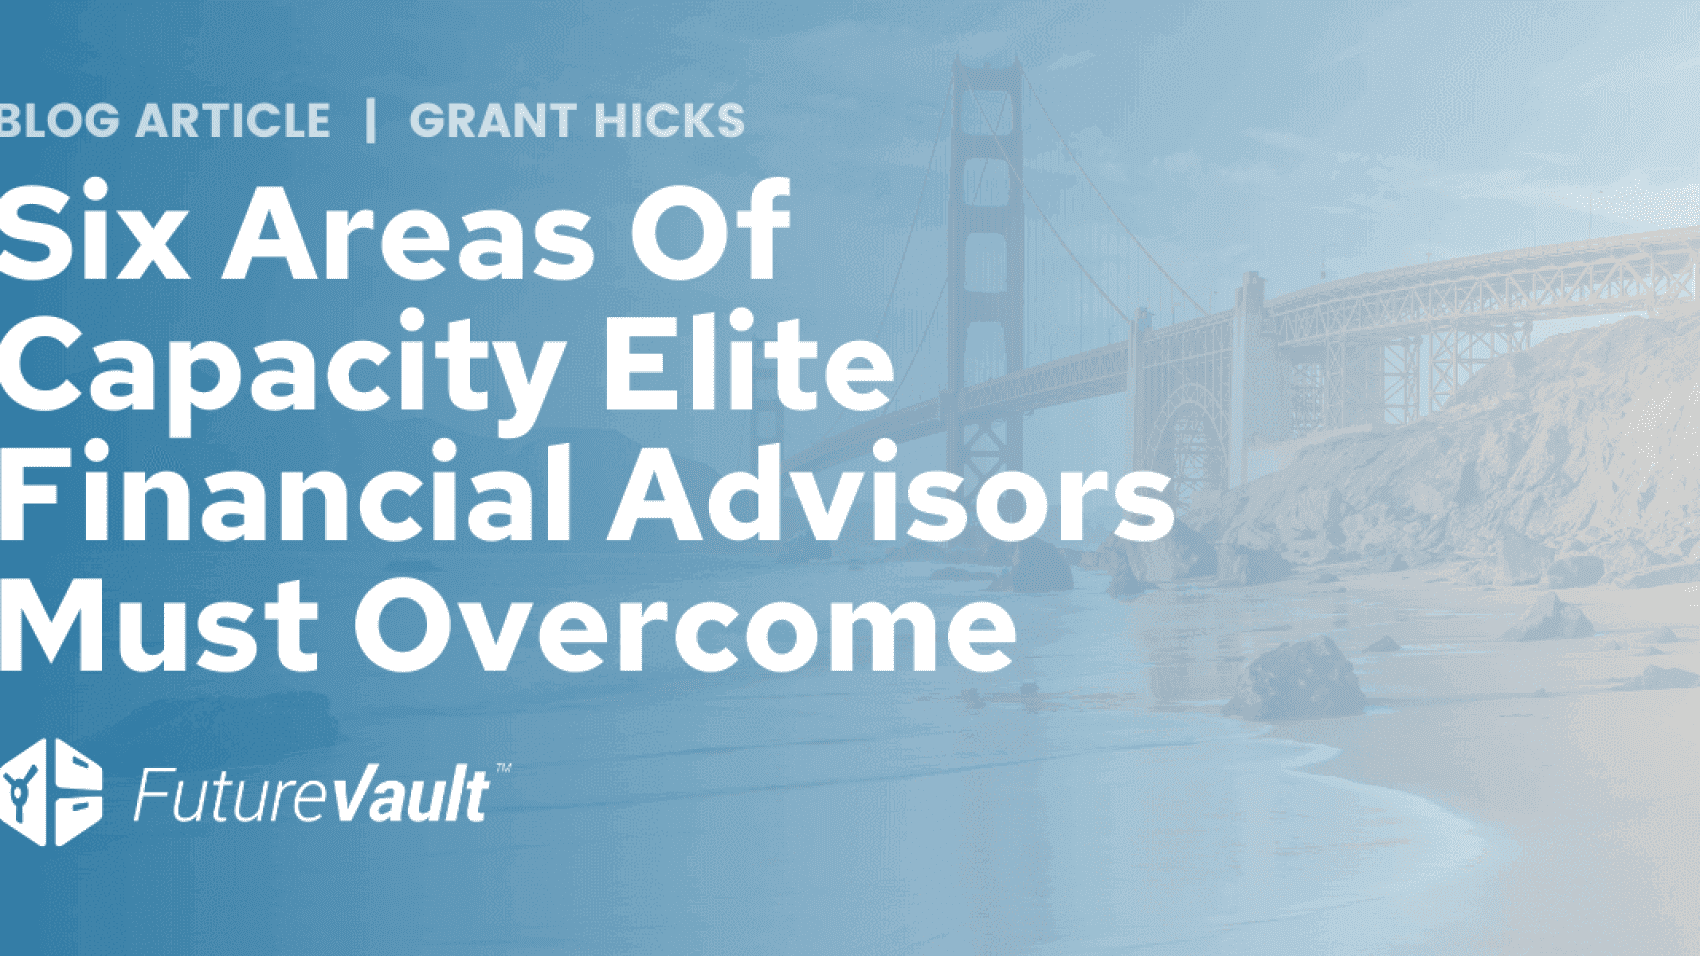 Six Areas Of Capacity Elite Financial Advisors and Firms Must Overcome - Grant Hicks-FutureVault